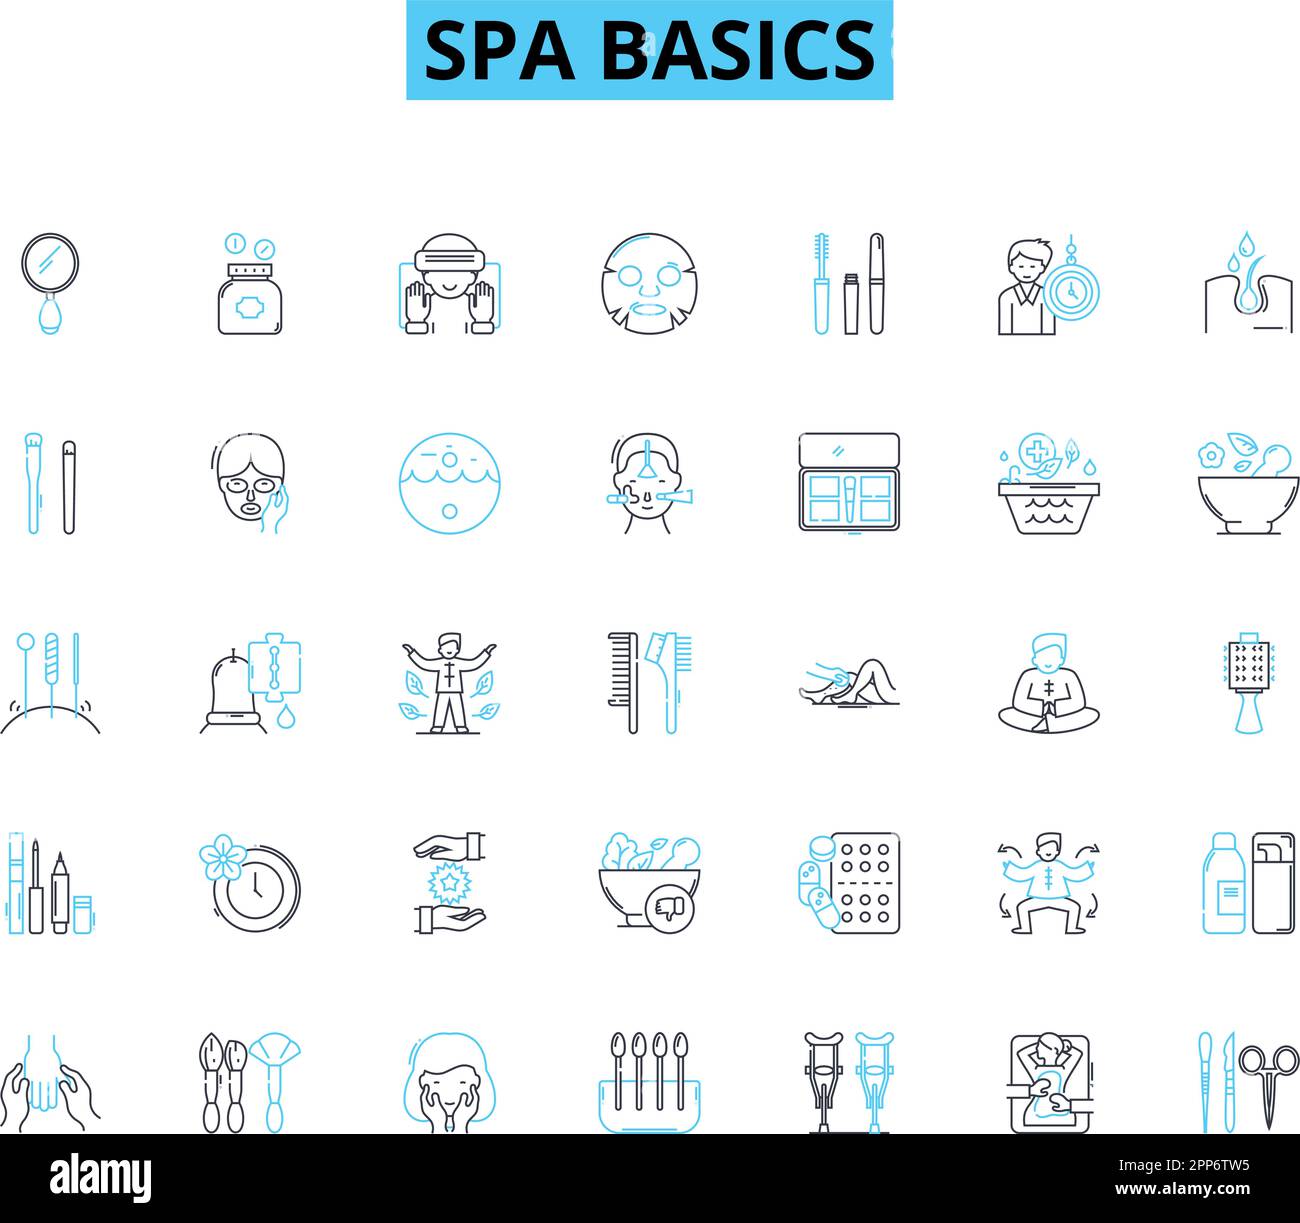 Spa basics linear icons set. Relaxation, Pampering, Massage, Soothing, Aromatherapy, Meditation, Skincare line vector and concept signs. Rejuvenation Stock Vector